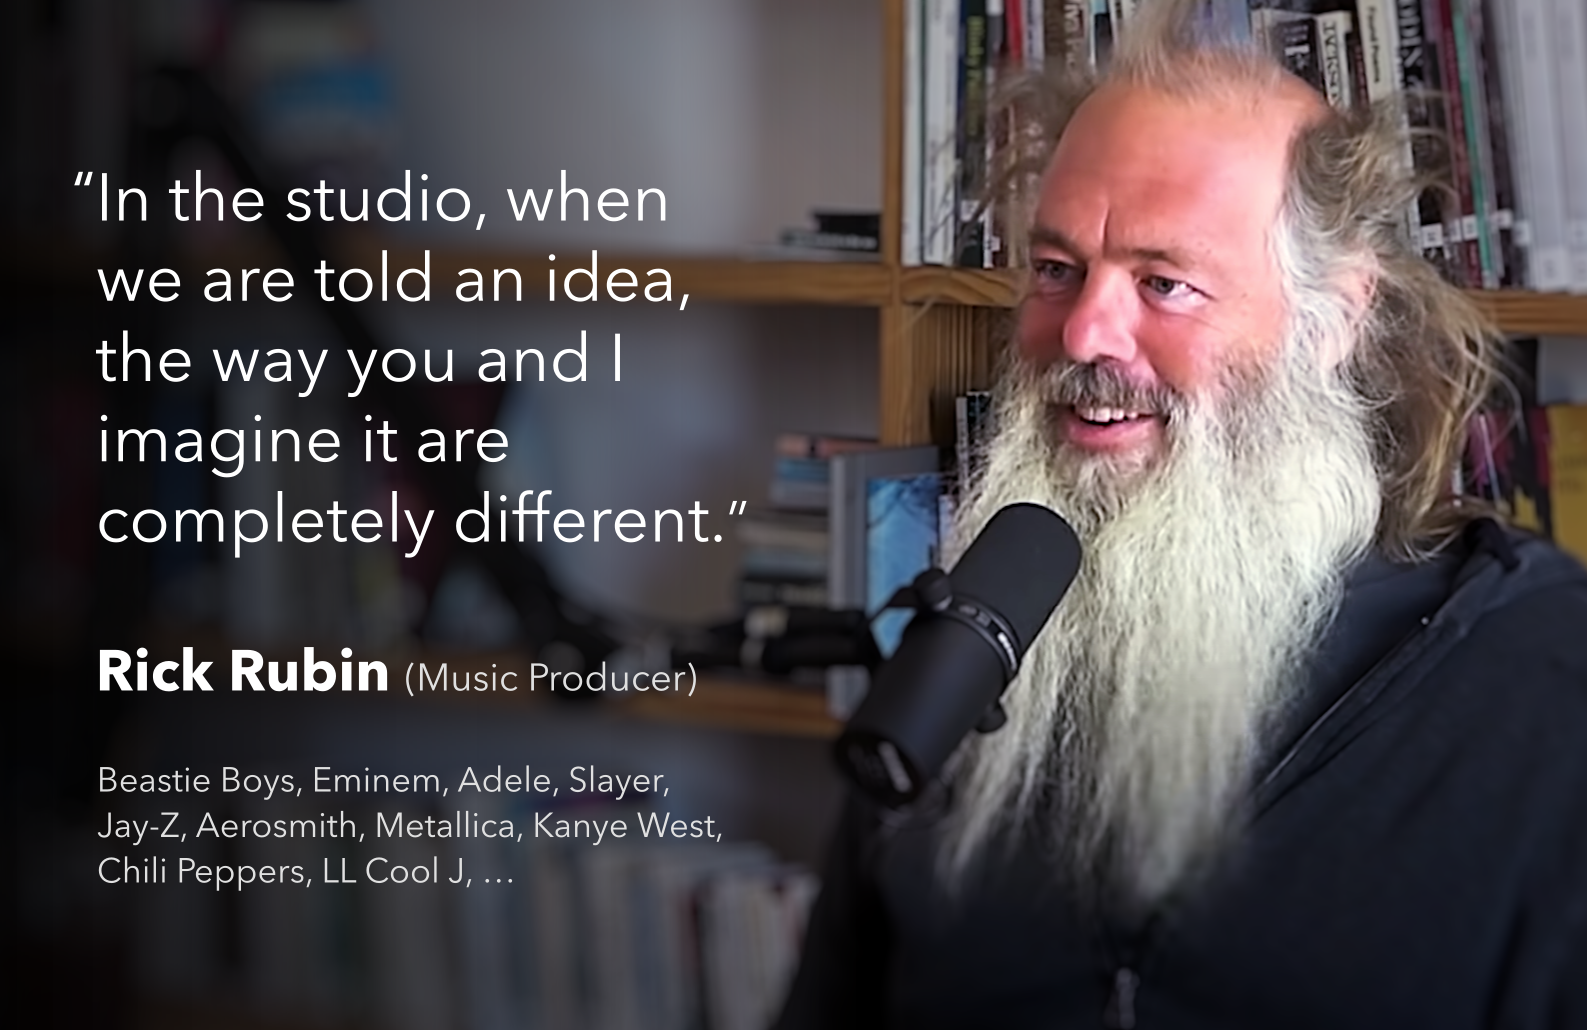 In the studio, when we are told an idea, the way you and I imagine it are completely different. - Rick Rubin